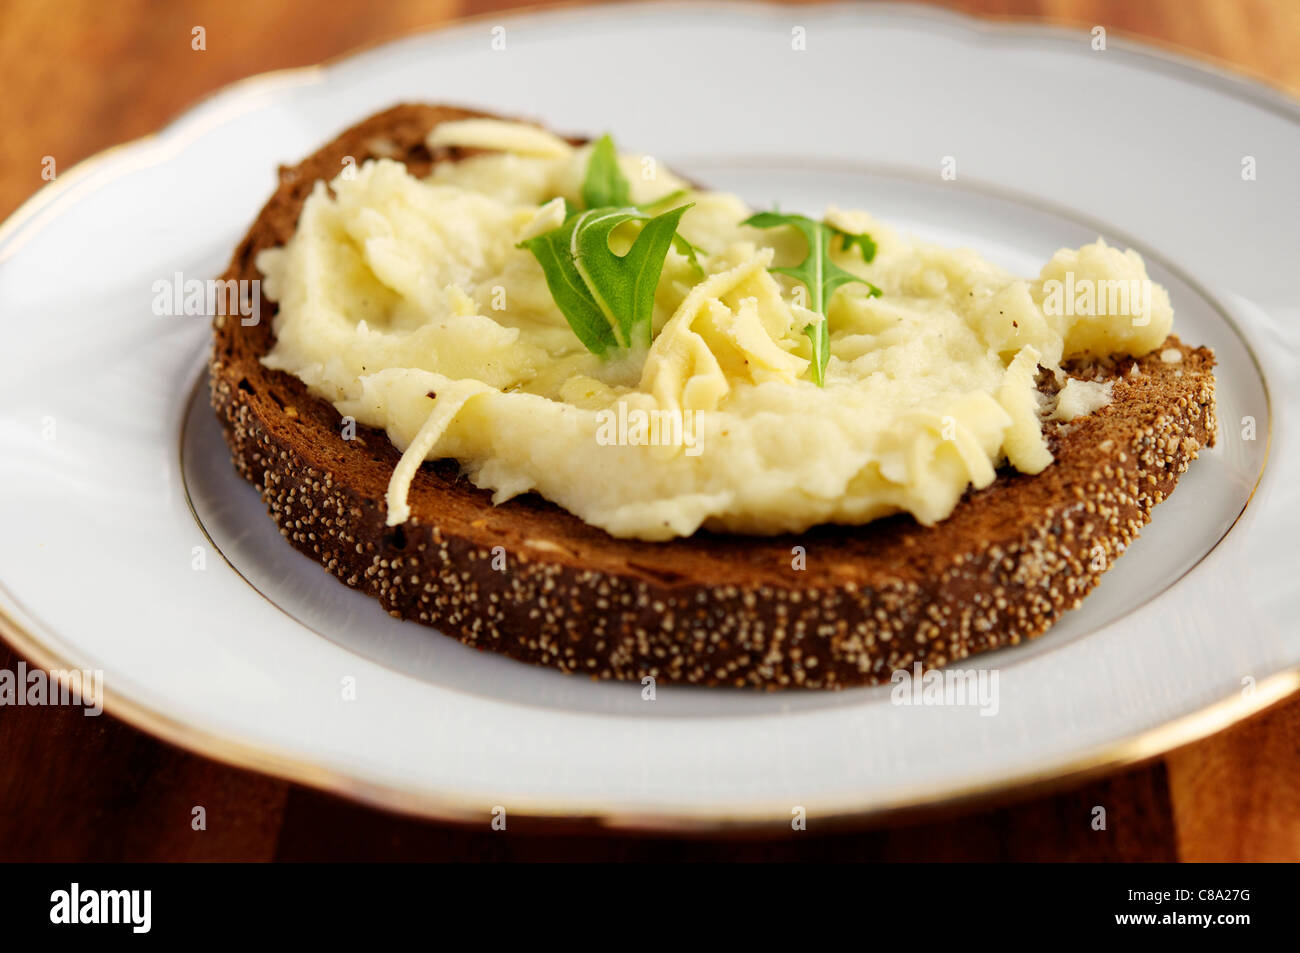 Parsnip Bruschetta with Soy Cheese, Truffle Oil and Rucola. Stock Photo